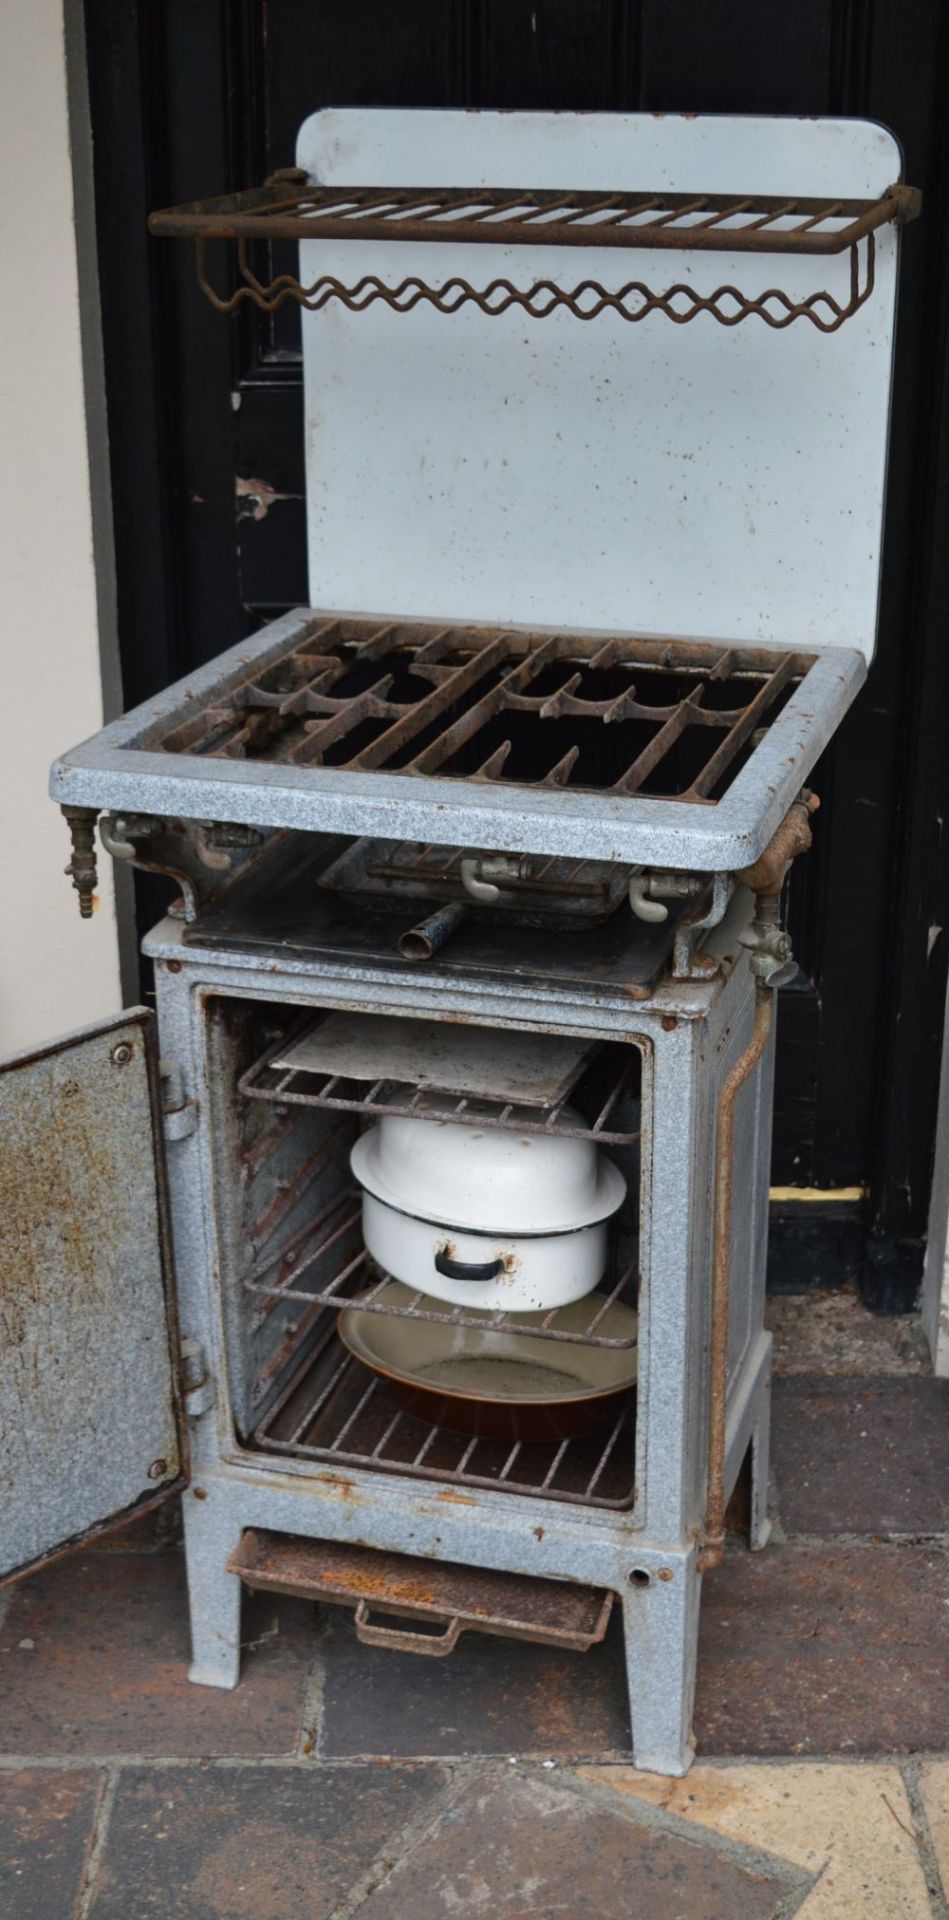 19TH-CENTURY ENAMEL FREE-STANDING GAS COOKER - Image 2 of 4